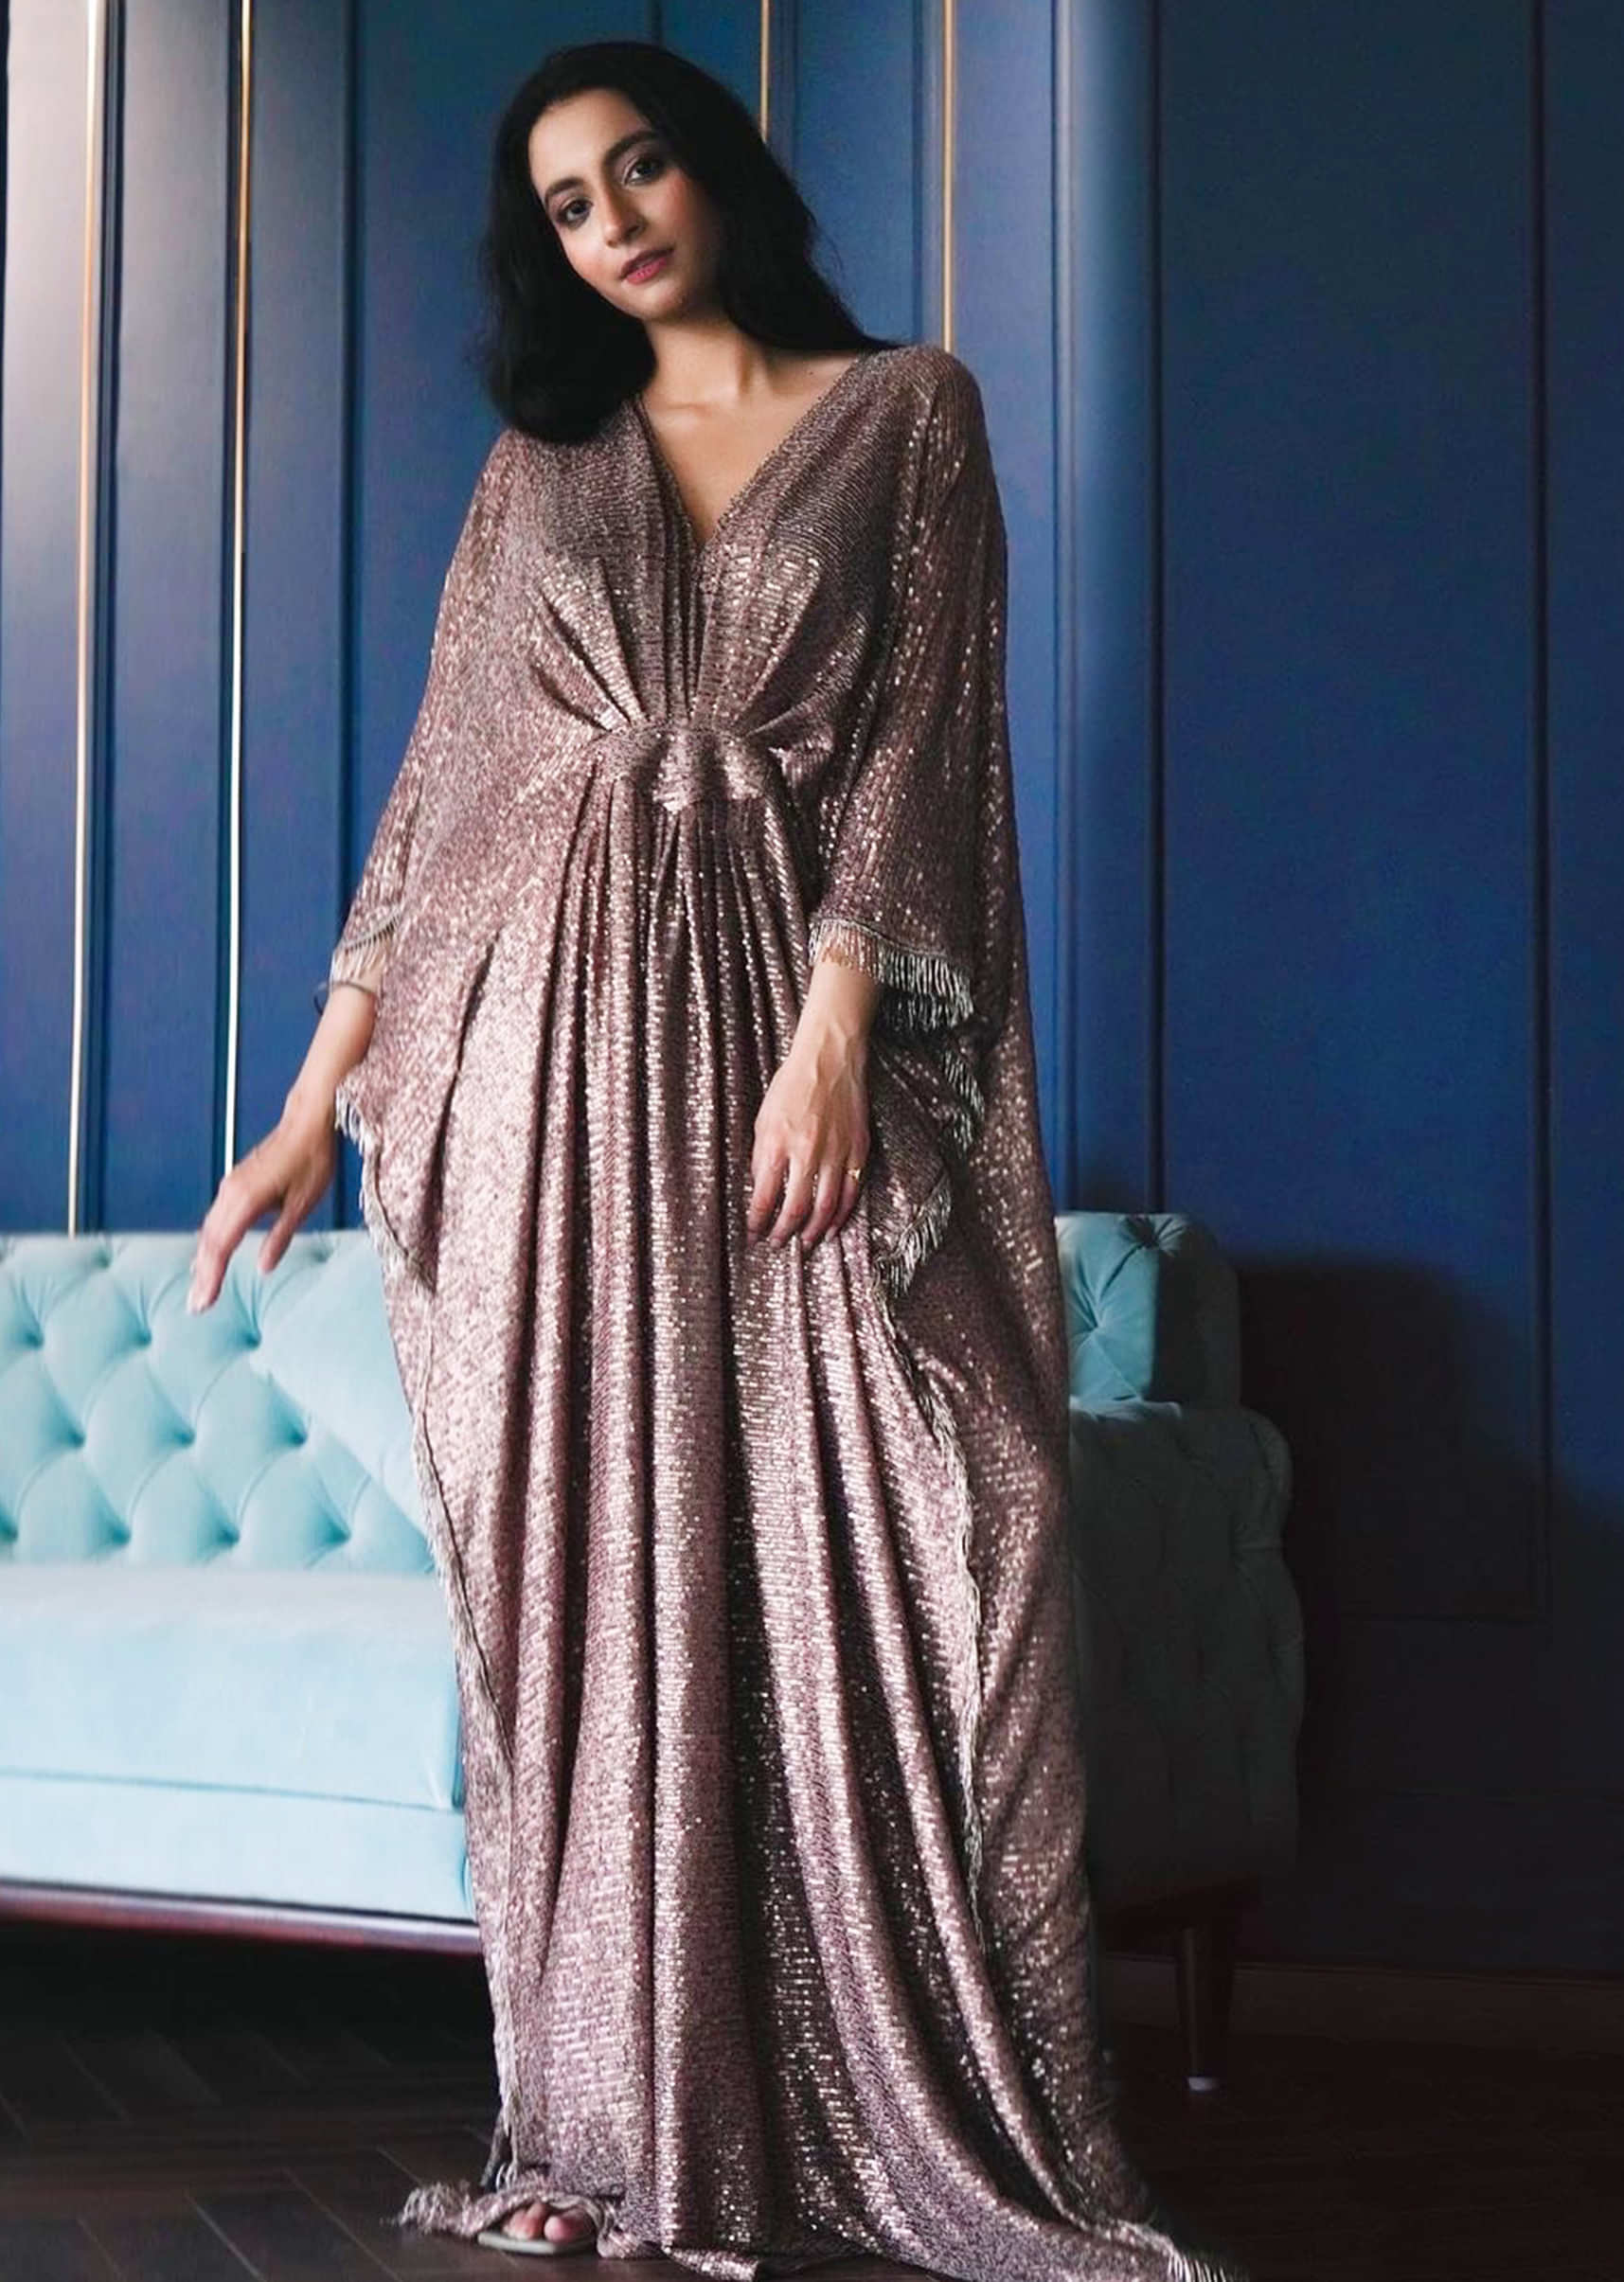 Taupe Sequins Kaftan Dress With Gathers In The Front And Plunging Neckline